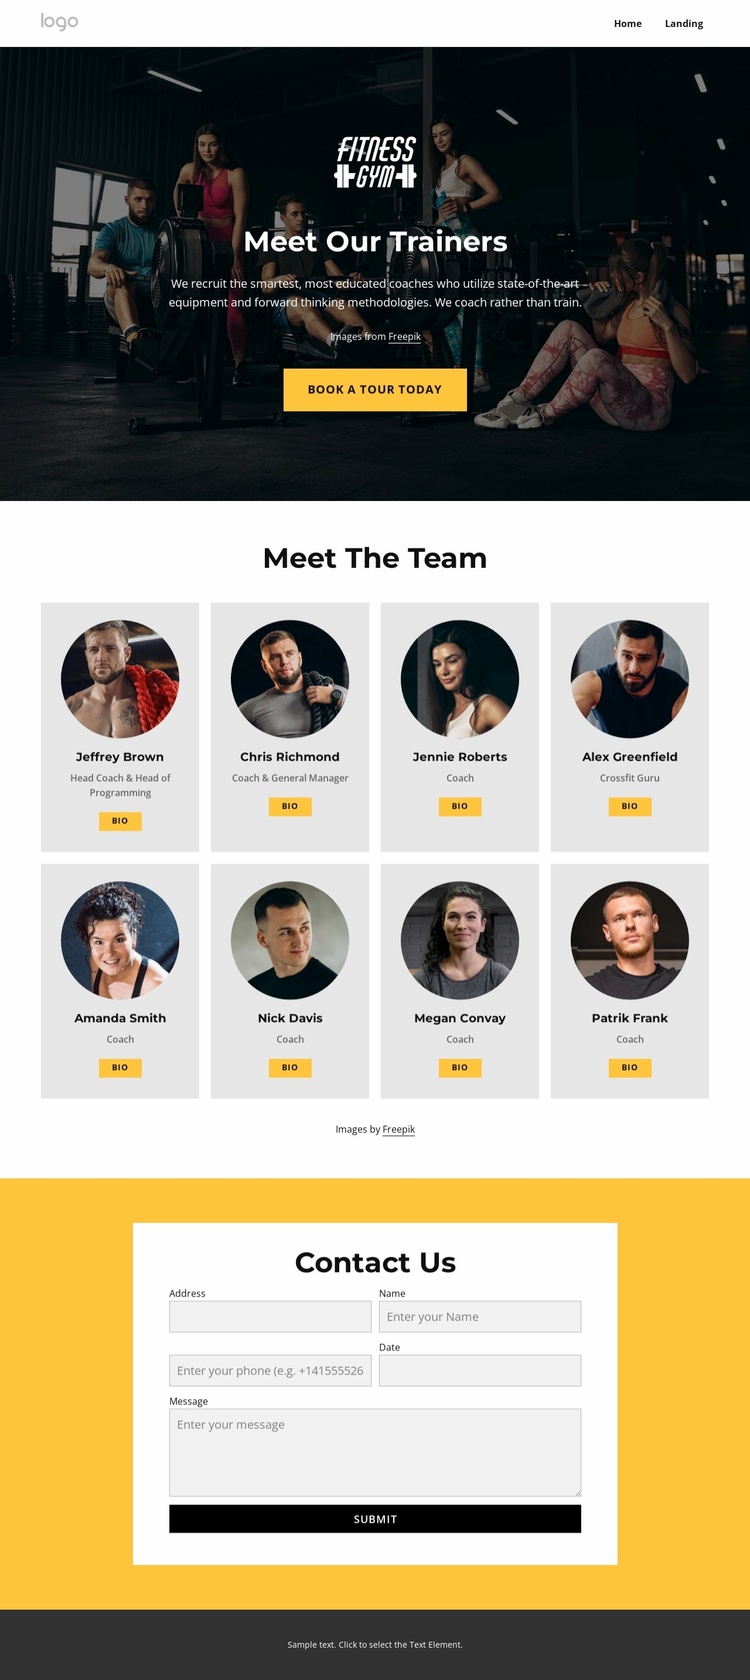 Meet our trainers Landing Page